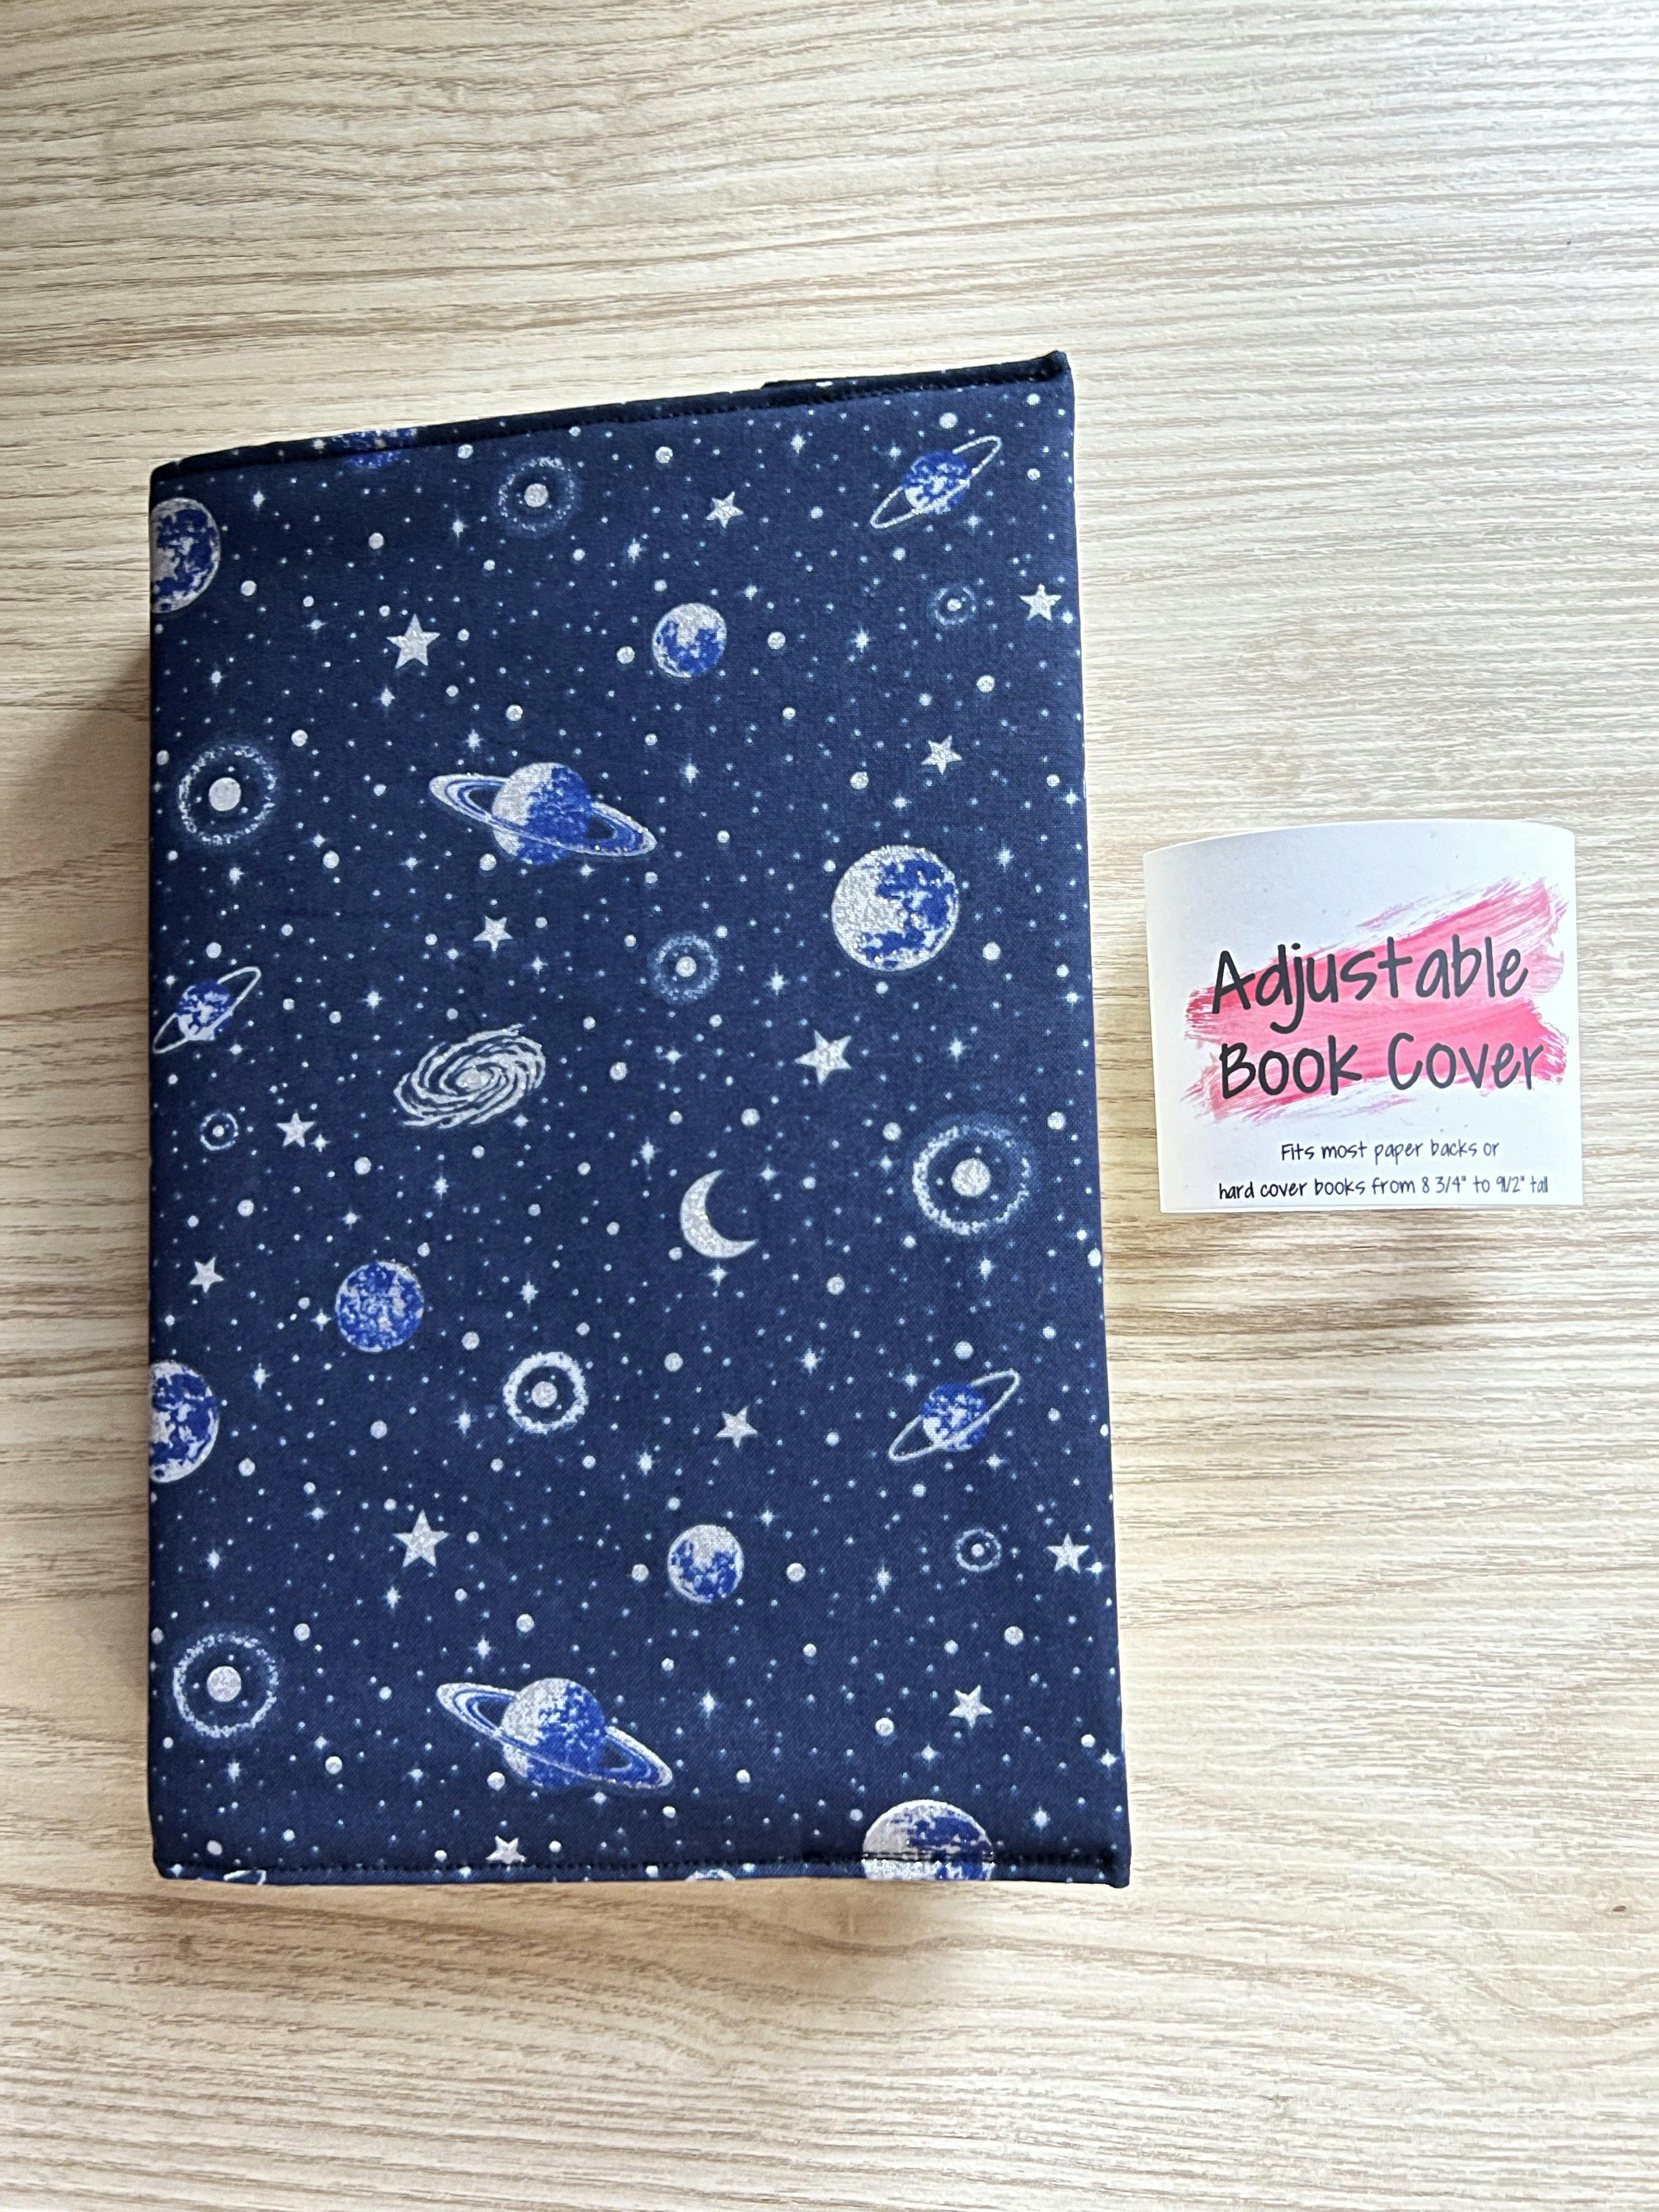 Space Adjustable Book Cover